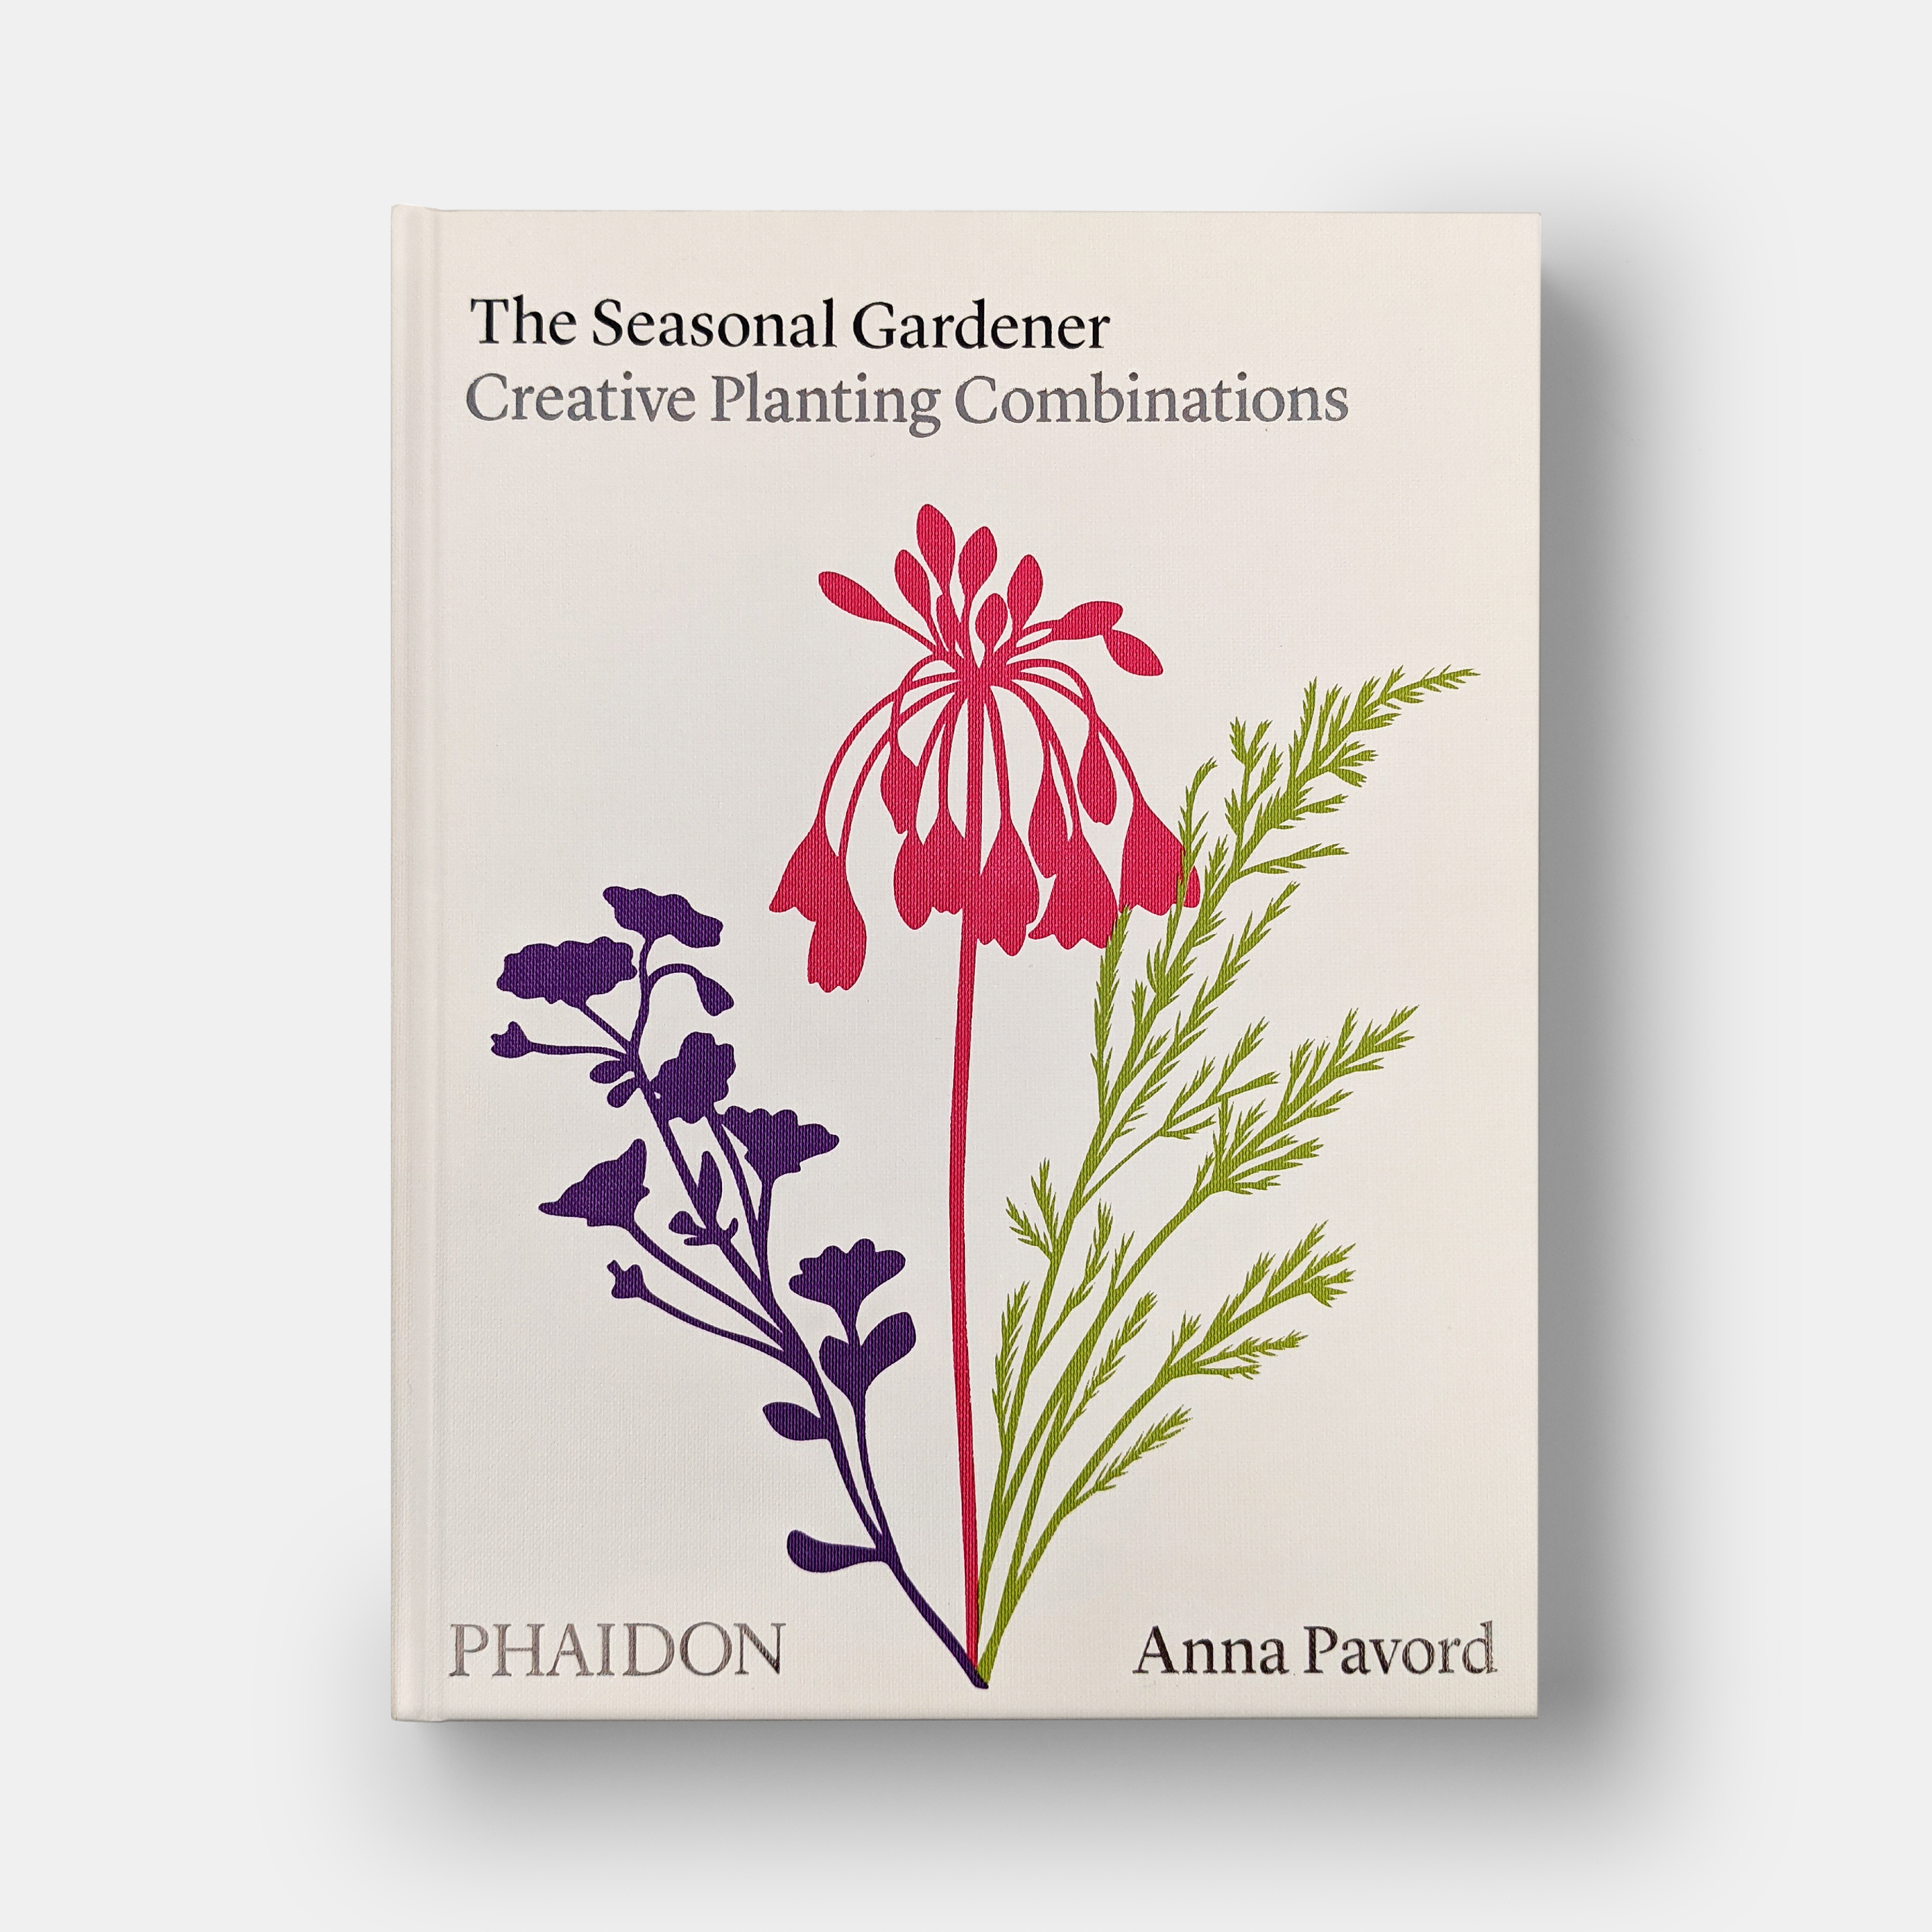 All you need to know about The Seasonal Gardener